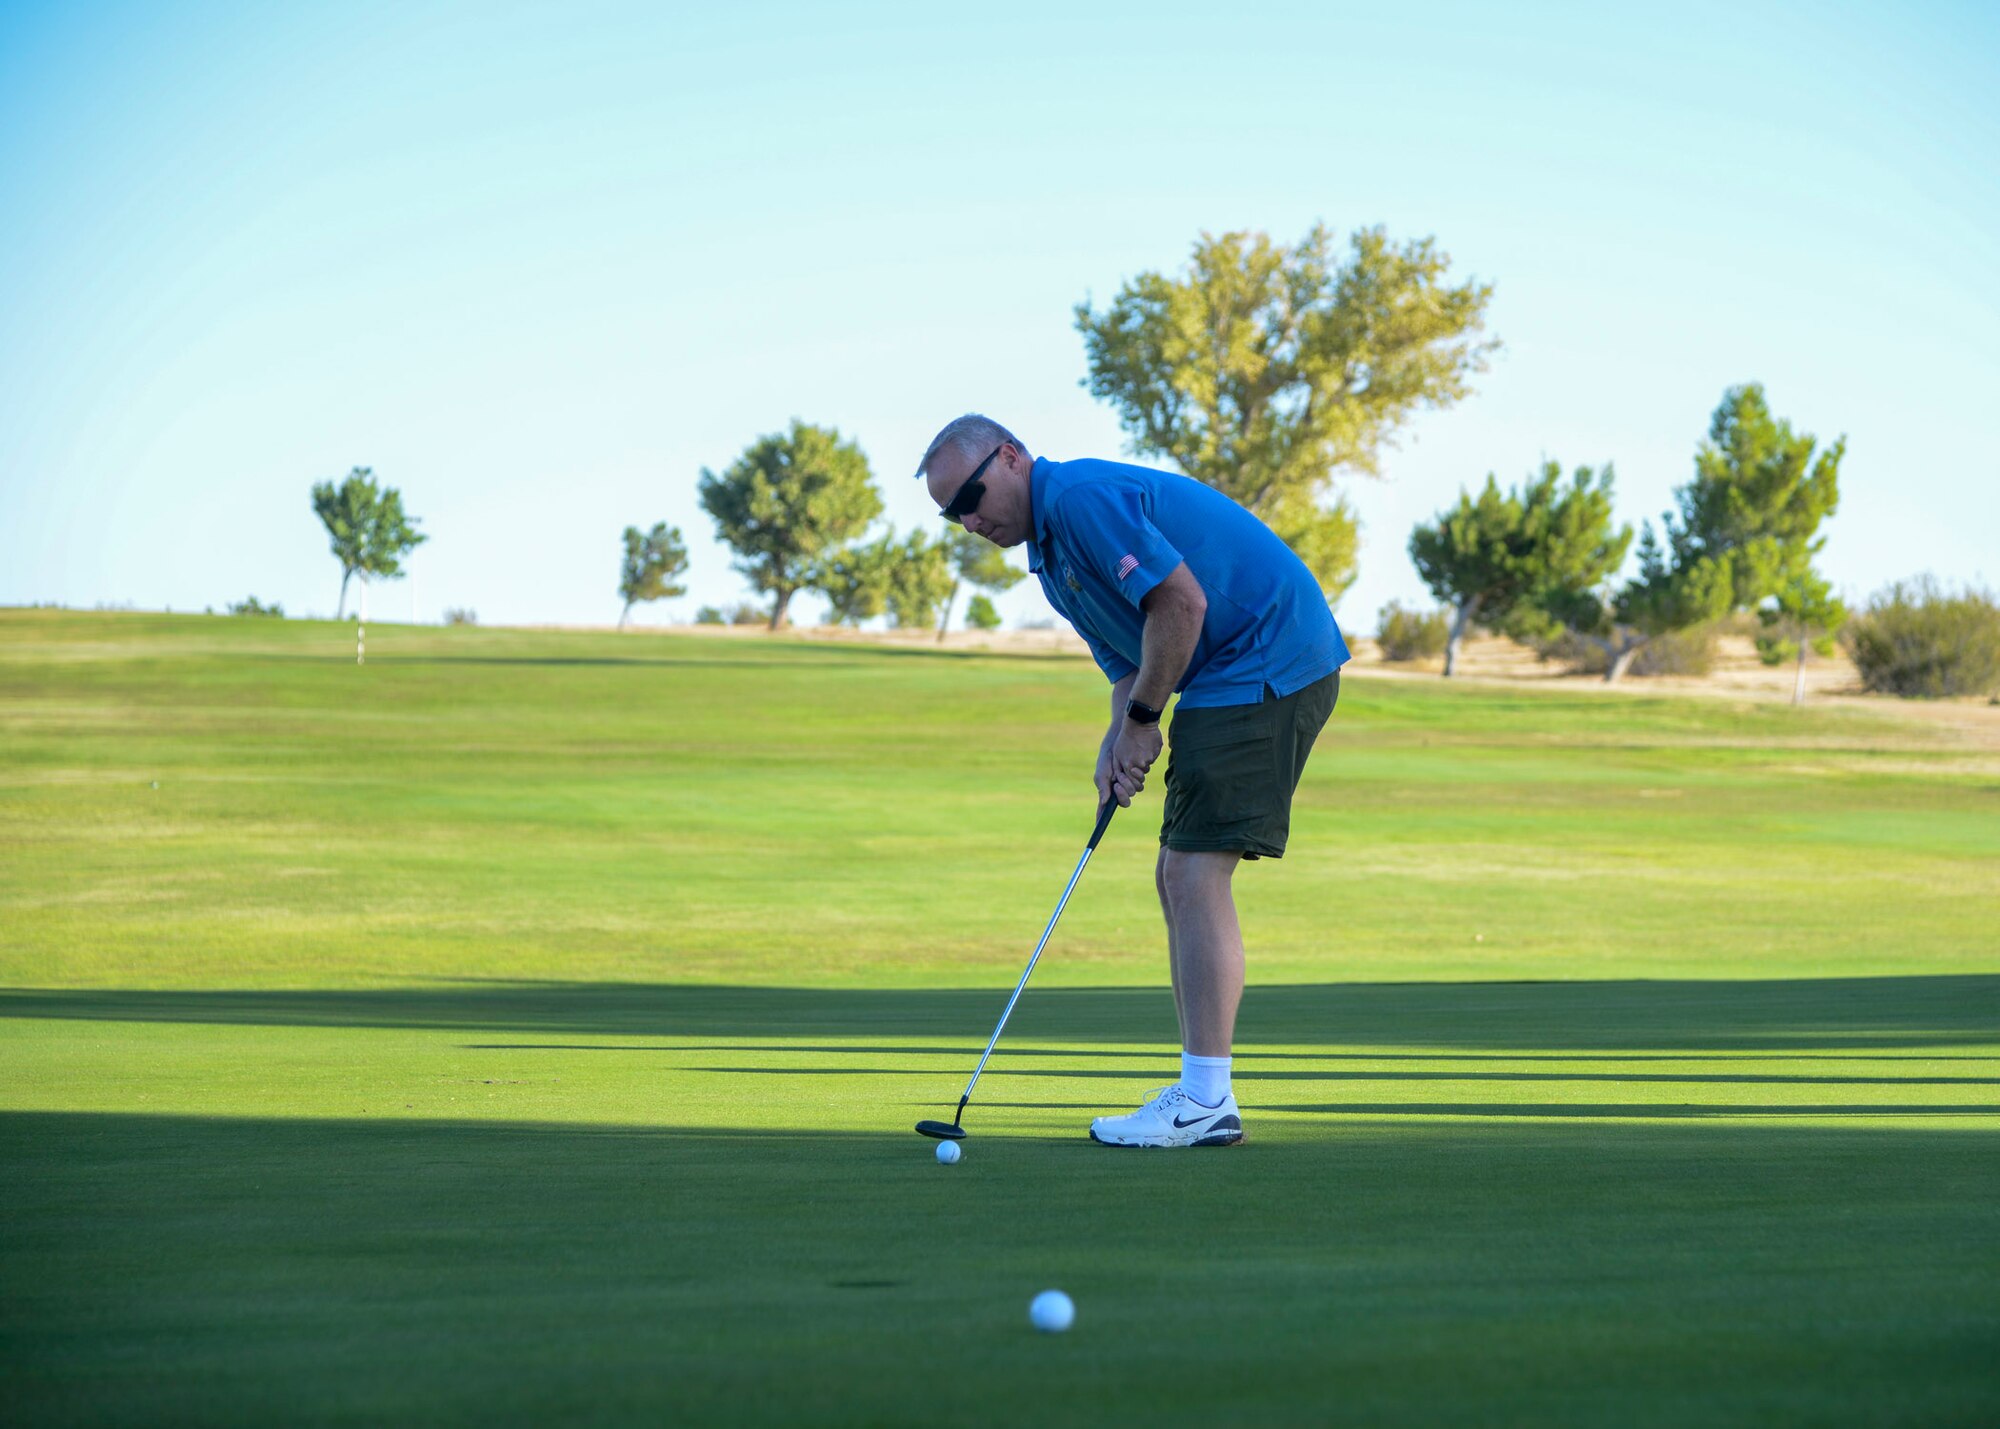 Col. Kirk Reagan, 412th Test Wing Vice Commander, hits a putt during a golf tournament as part of the U.S. Air Force Test Pilot School 75th anniversary celebration at Edwards Air Force Base, California, Sept. 21. (U.S. Air Force photo by Giancarlo Casem)